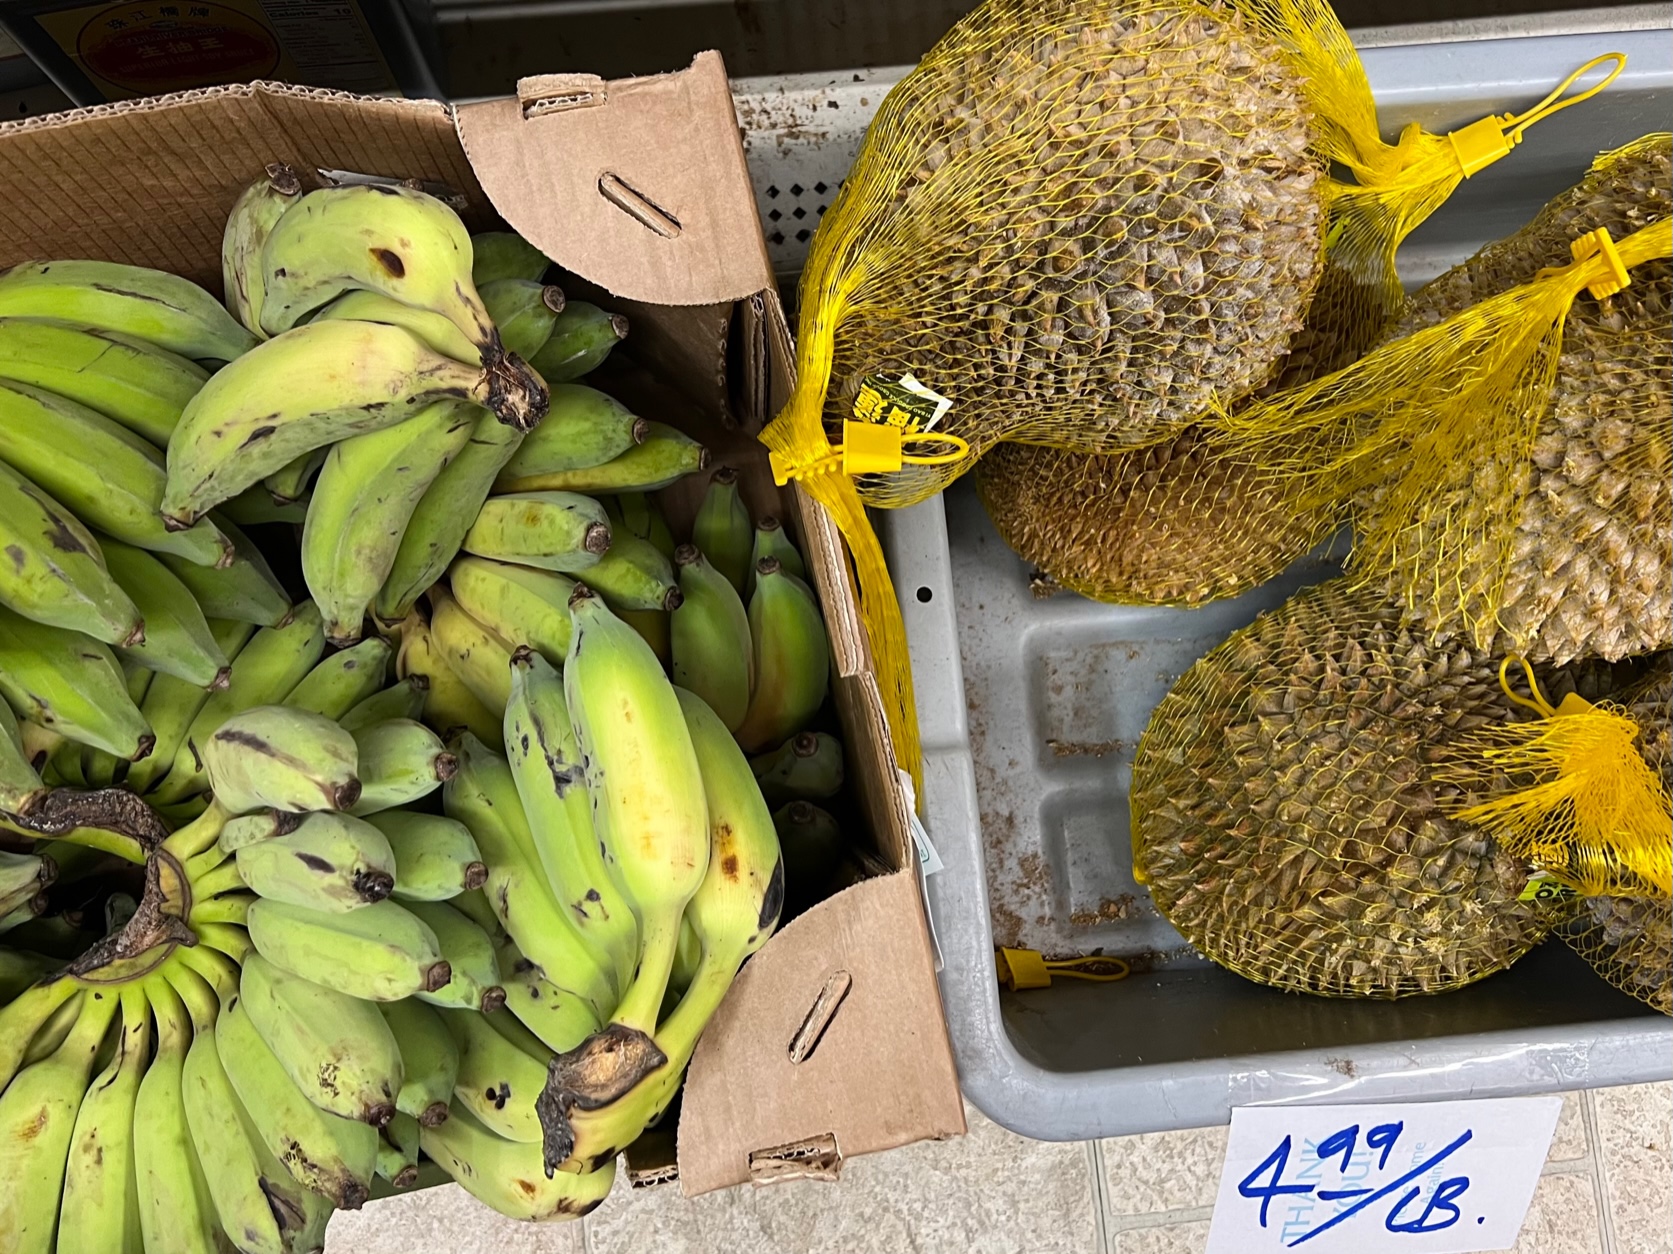 On the floor, there is a large box of bananas in a bunch, and a gray plastic bin of durian fruit. Photo by Alyssa Buckley.